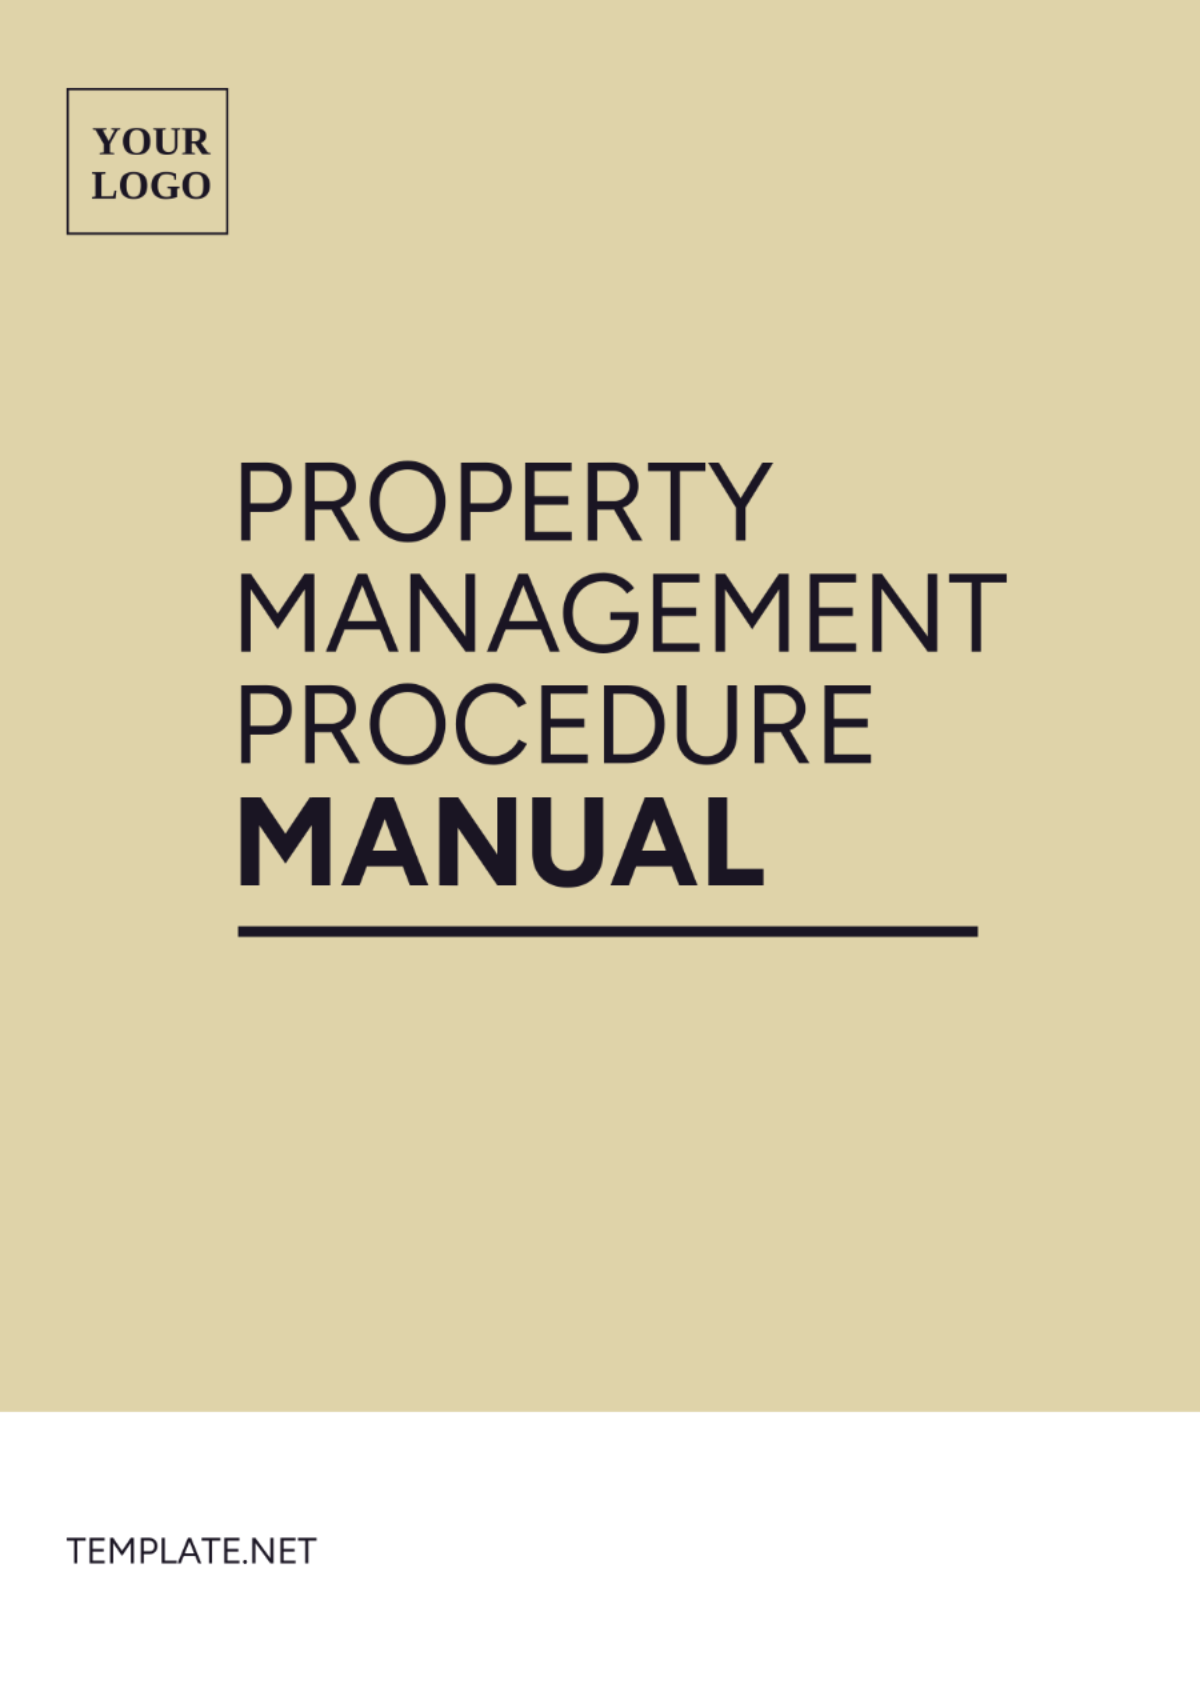 Free Property Management Procedure Manual Template